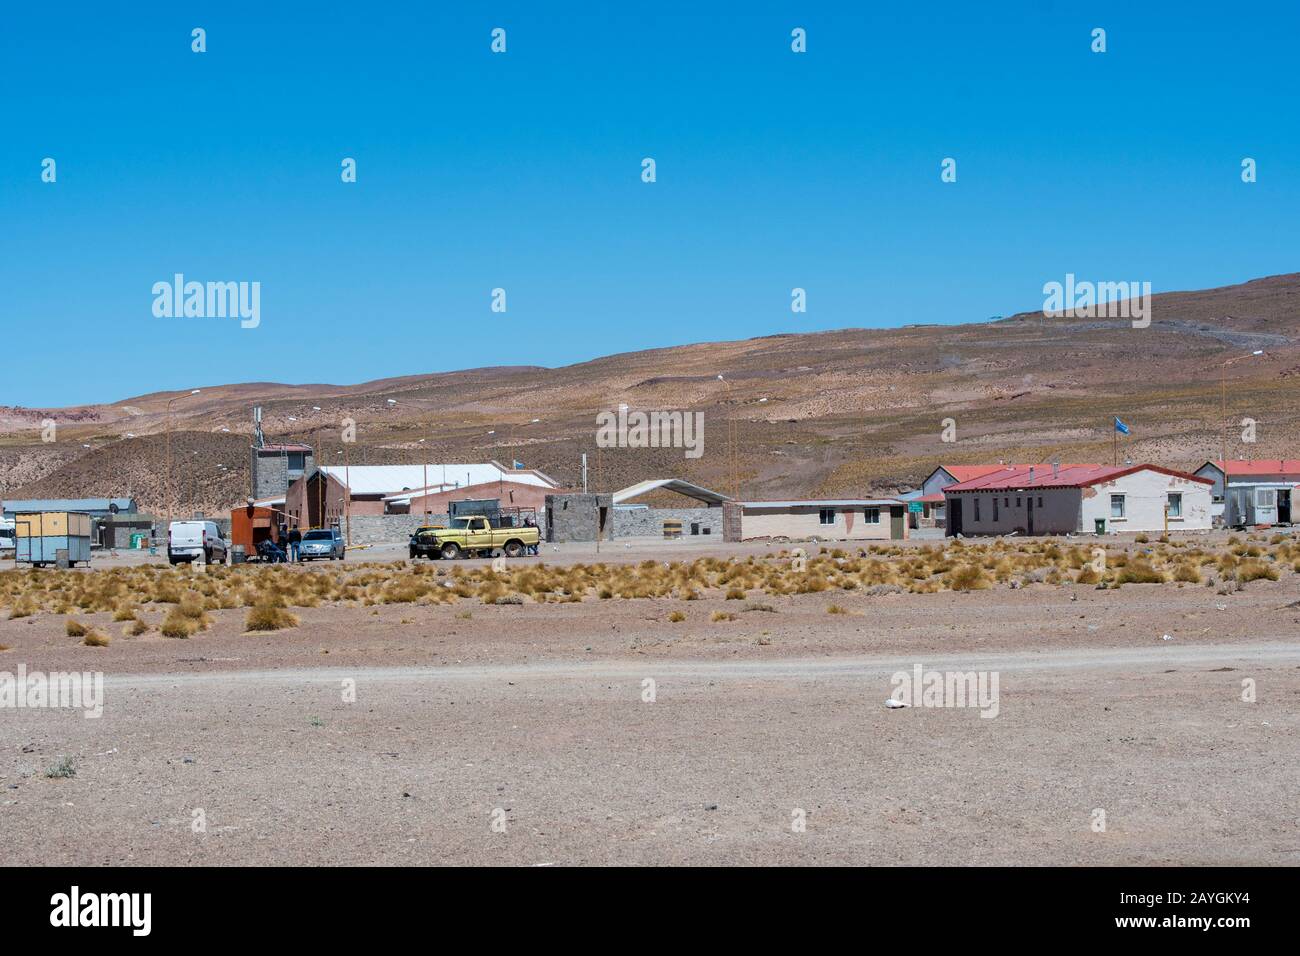 Argentinean border crossing to Chile at Jama Pass in the Andes Mountains, province of Jujuy, Argentina. Stock Photo